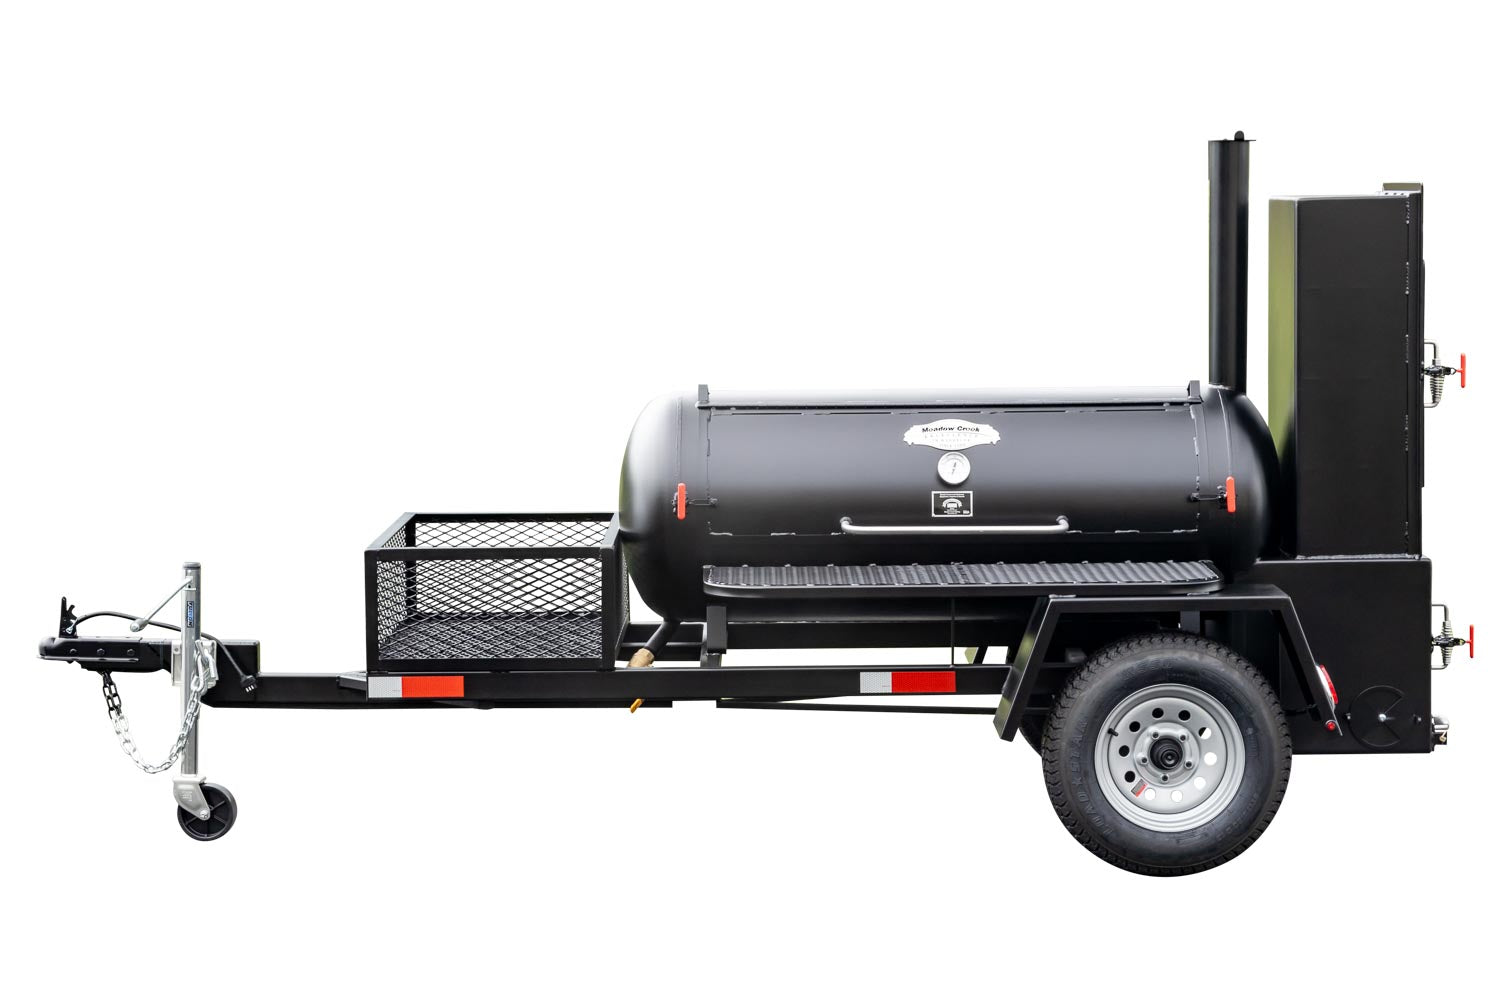 Full view of a Meadow Creek BBQ smoker trailer with a closed smoking chamber and a front utility basket, mounted on a sturdy black frame.